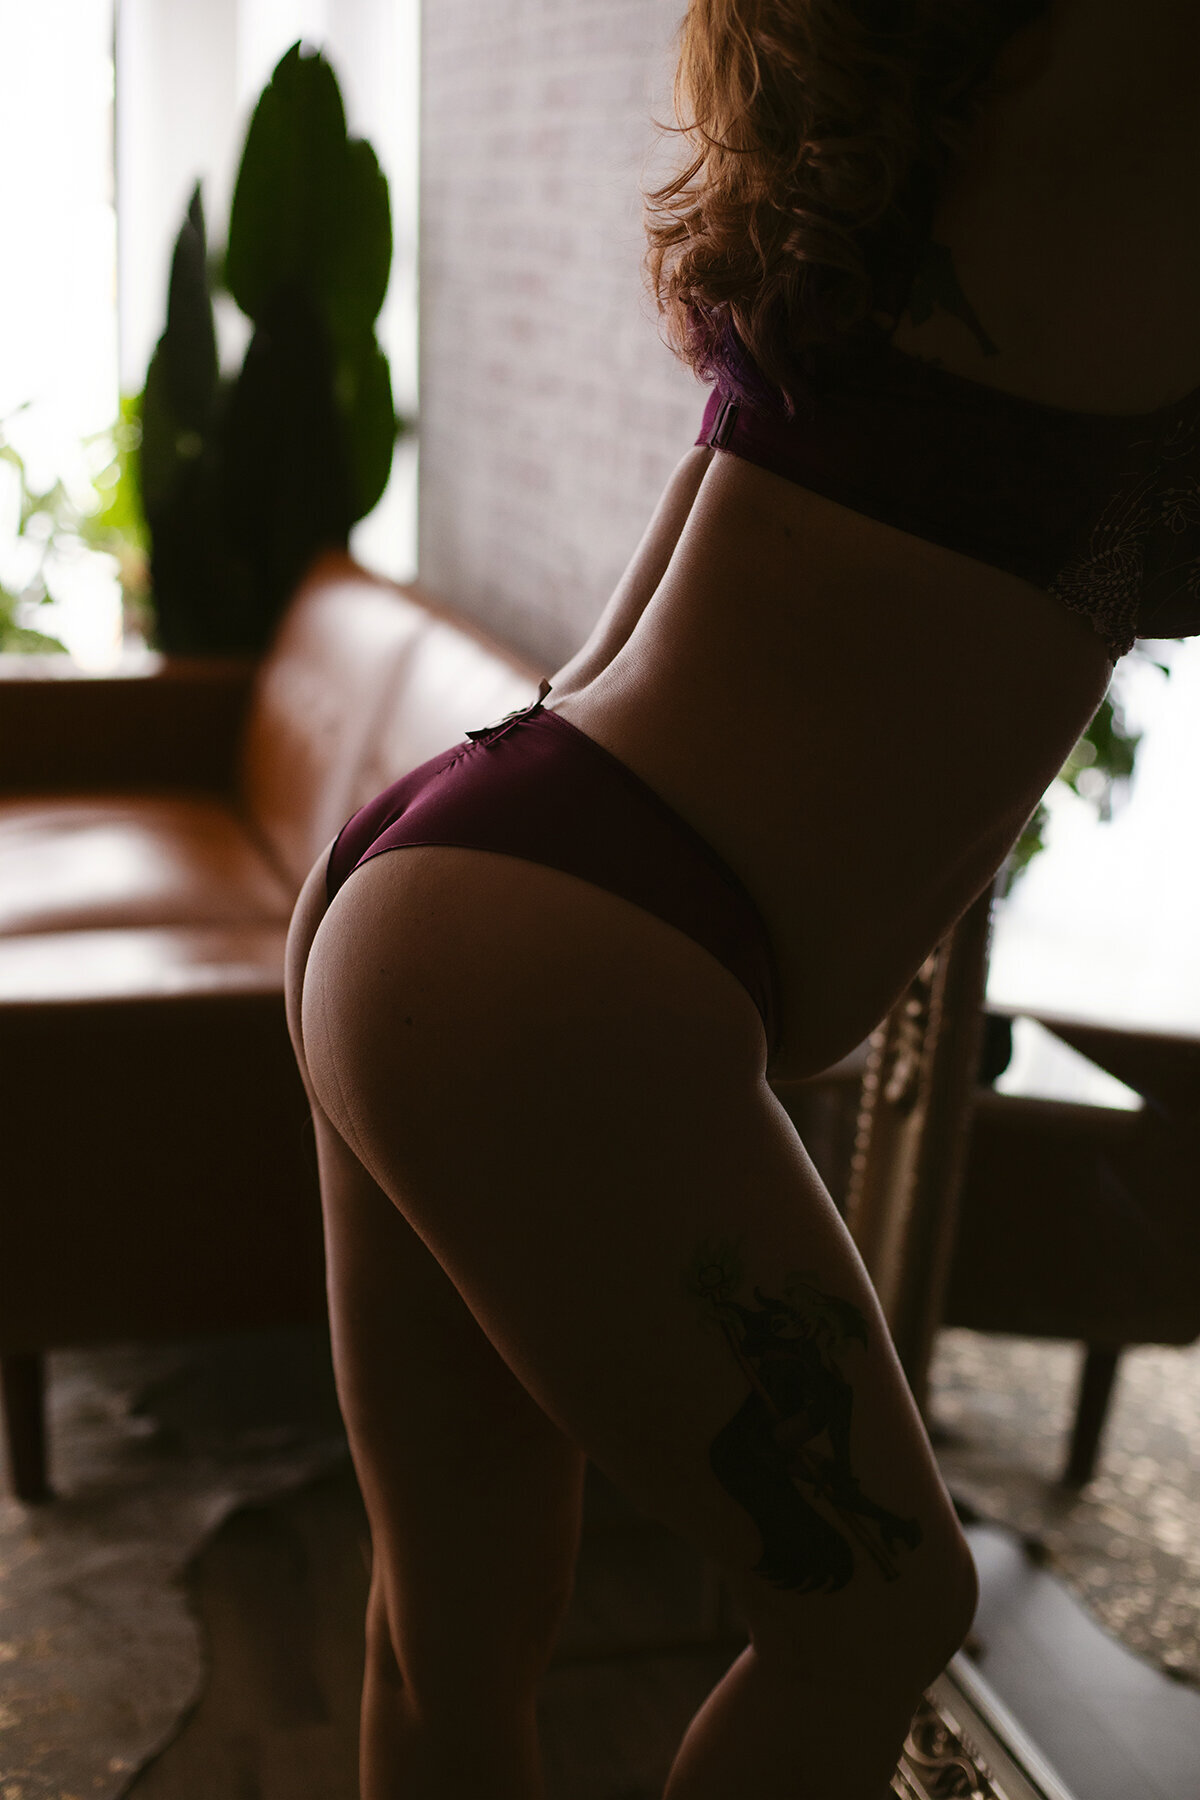 A woman in lingerie poses leaning  her backside out for a boudoir photoshoot.